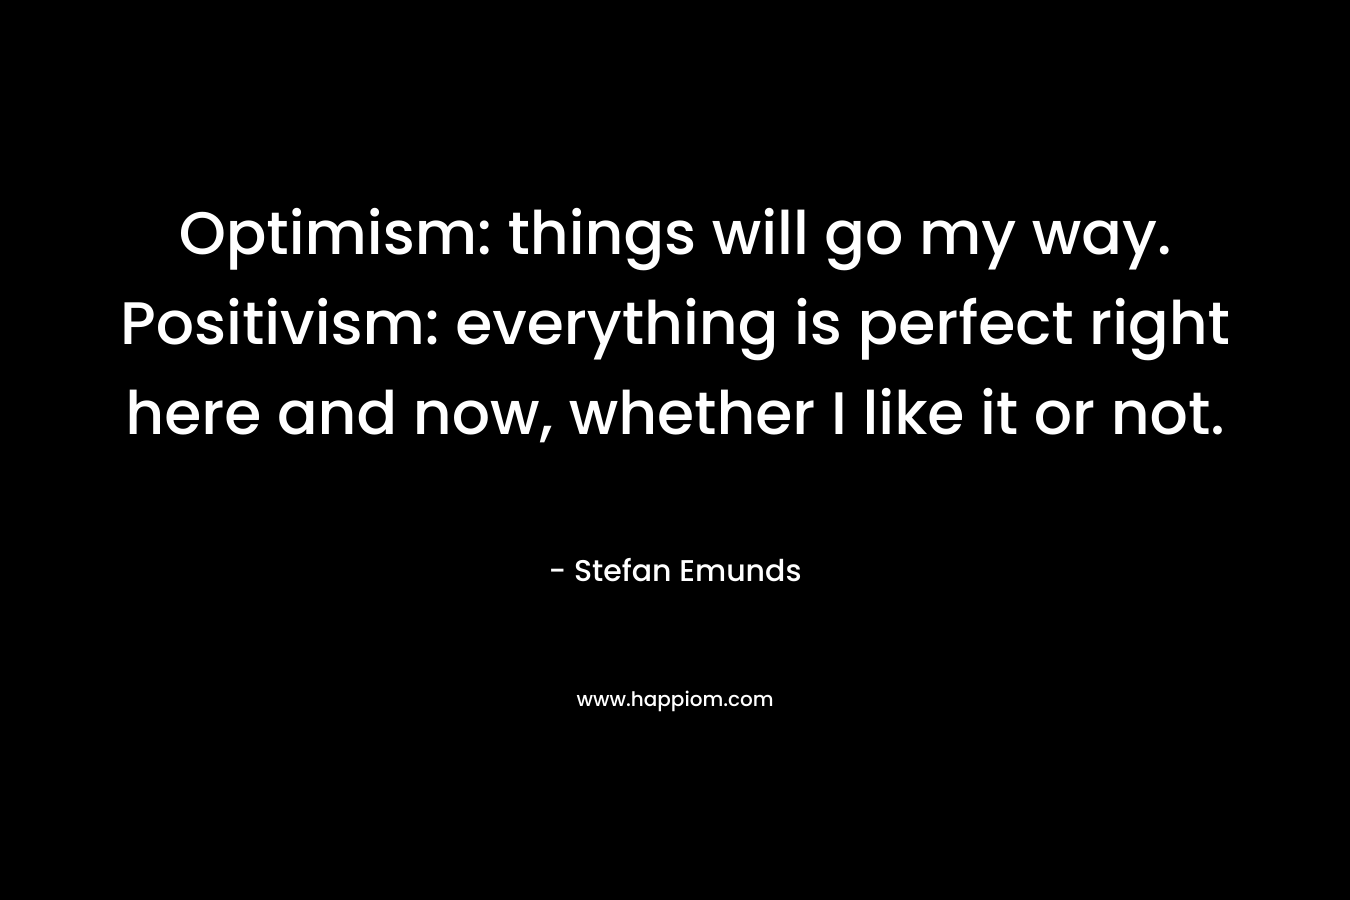 Optimism: things will go my way. Positivism: everything is perfect right here and now, whether I like it or not.